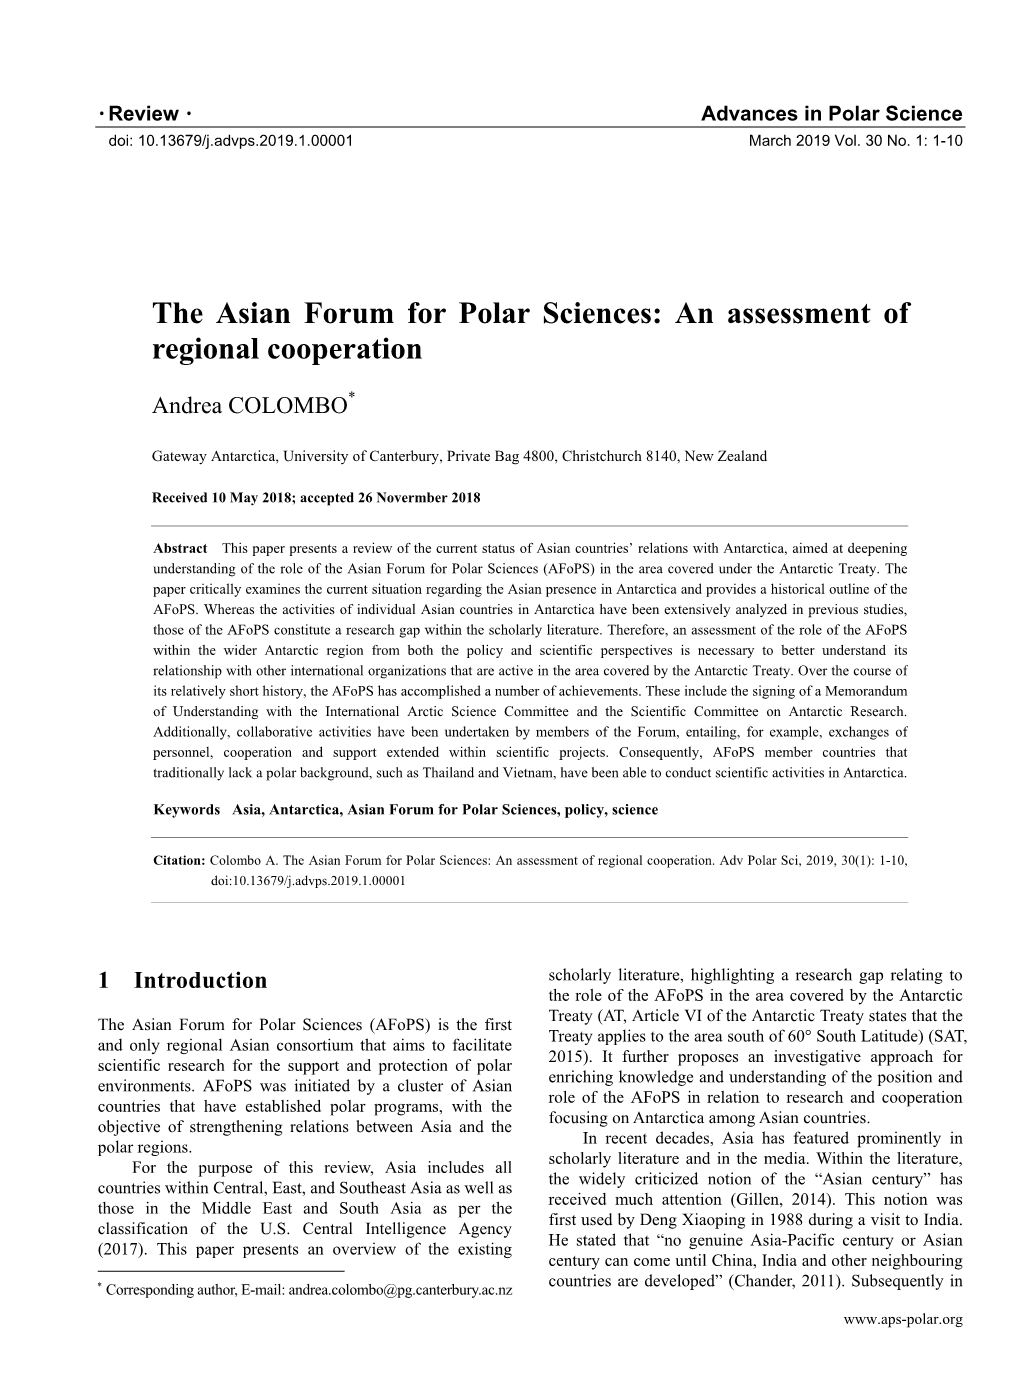 The Asian Forum for Polar Sciences: an Assessment of Regional Cooperation